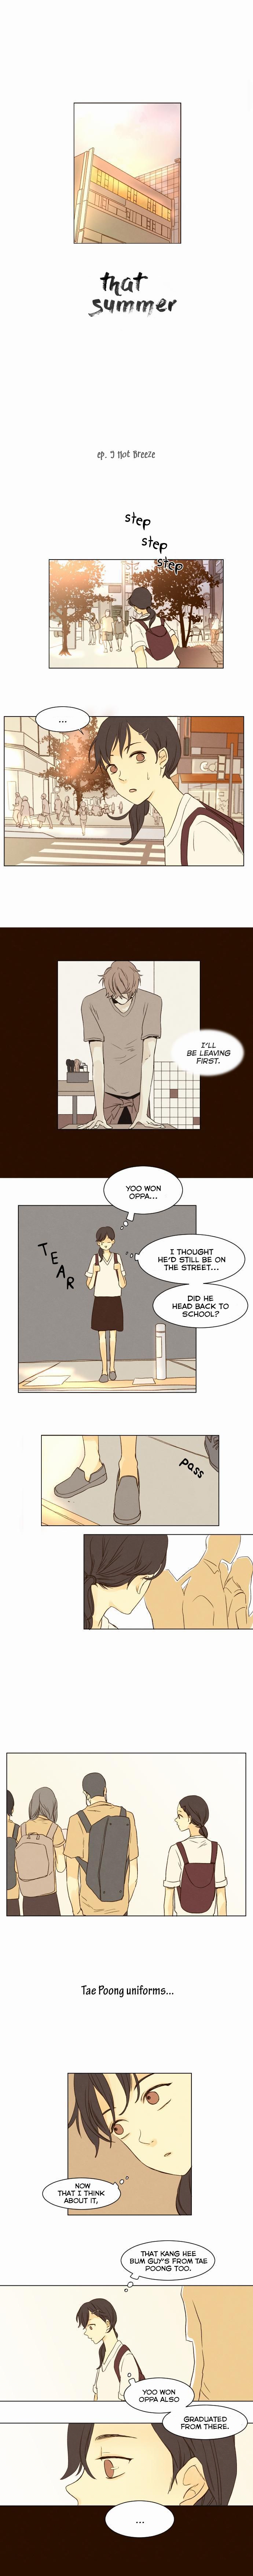 That Summer (KIM Hyun) Chapter 005 page 3